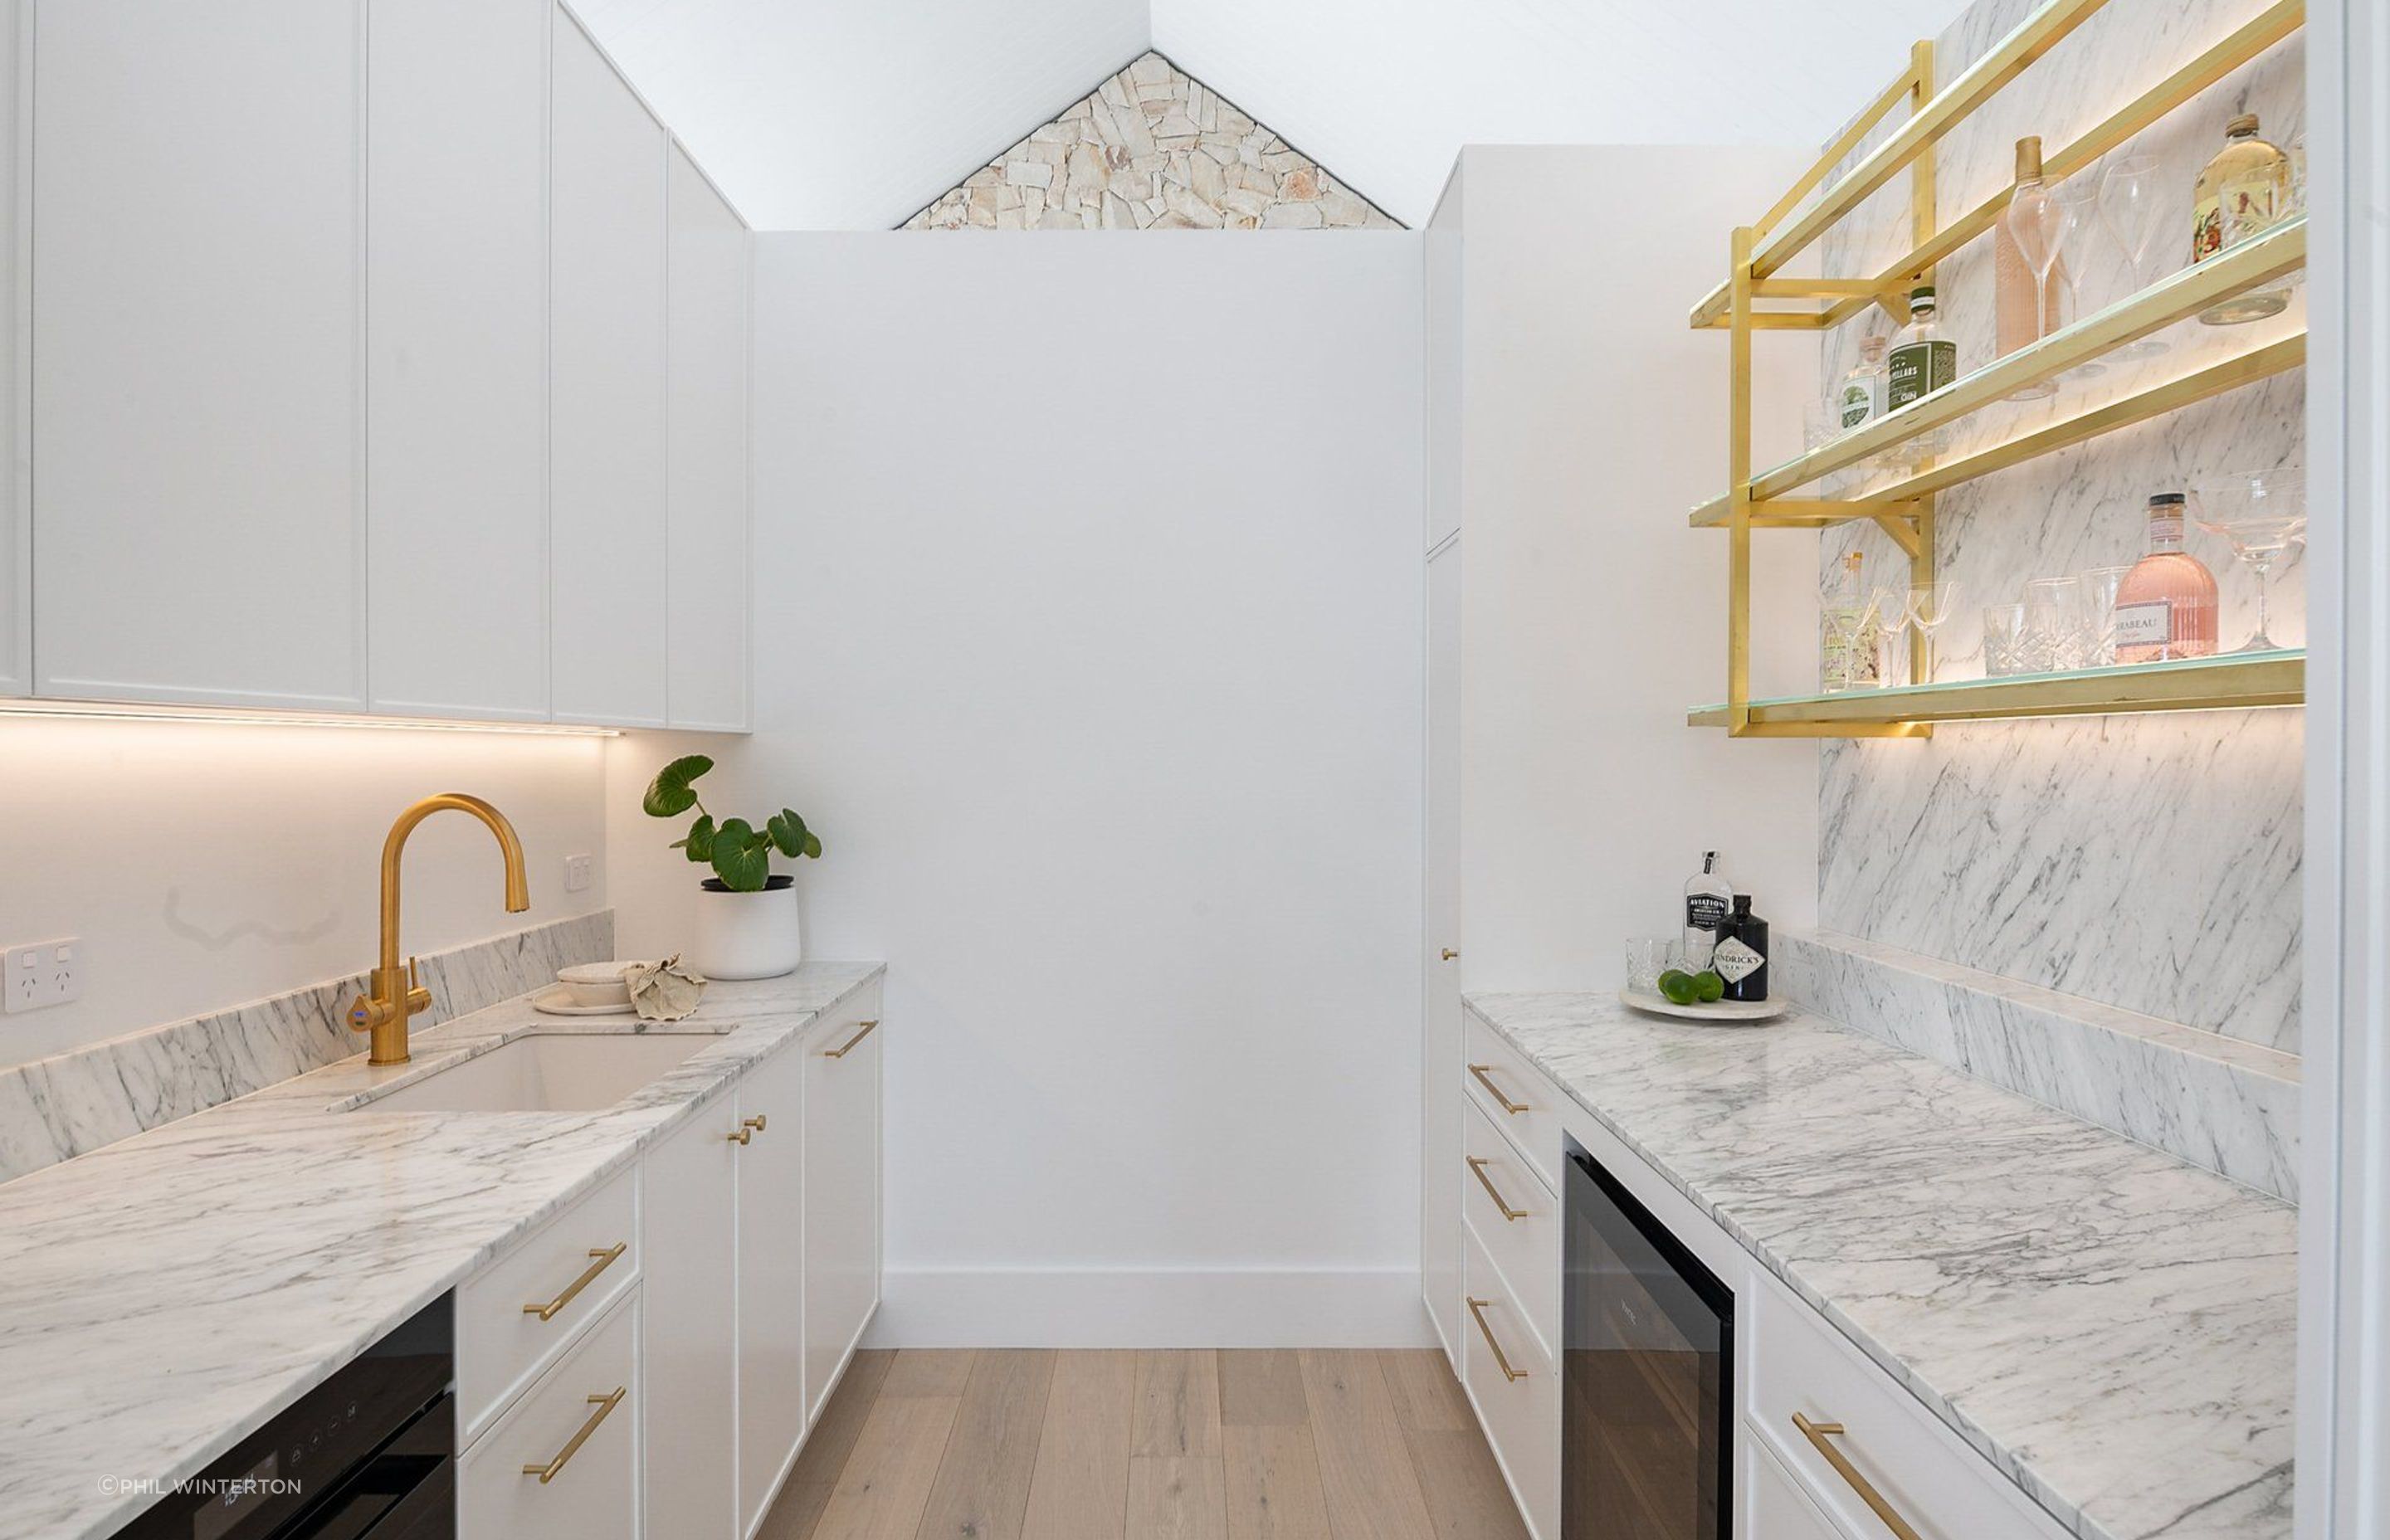 Brass finishes contrasts with marble in the butler's pantry.